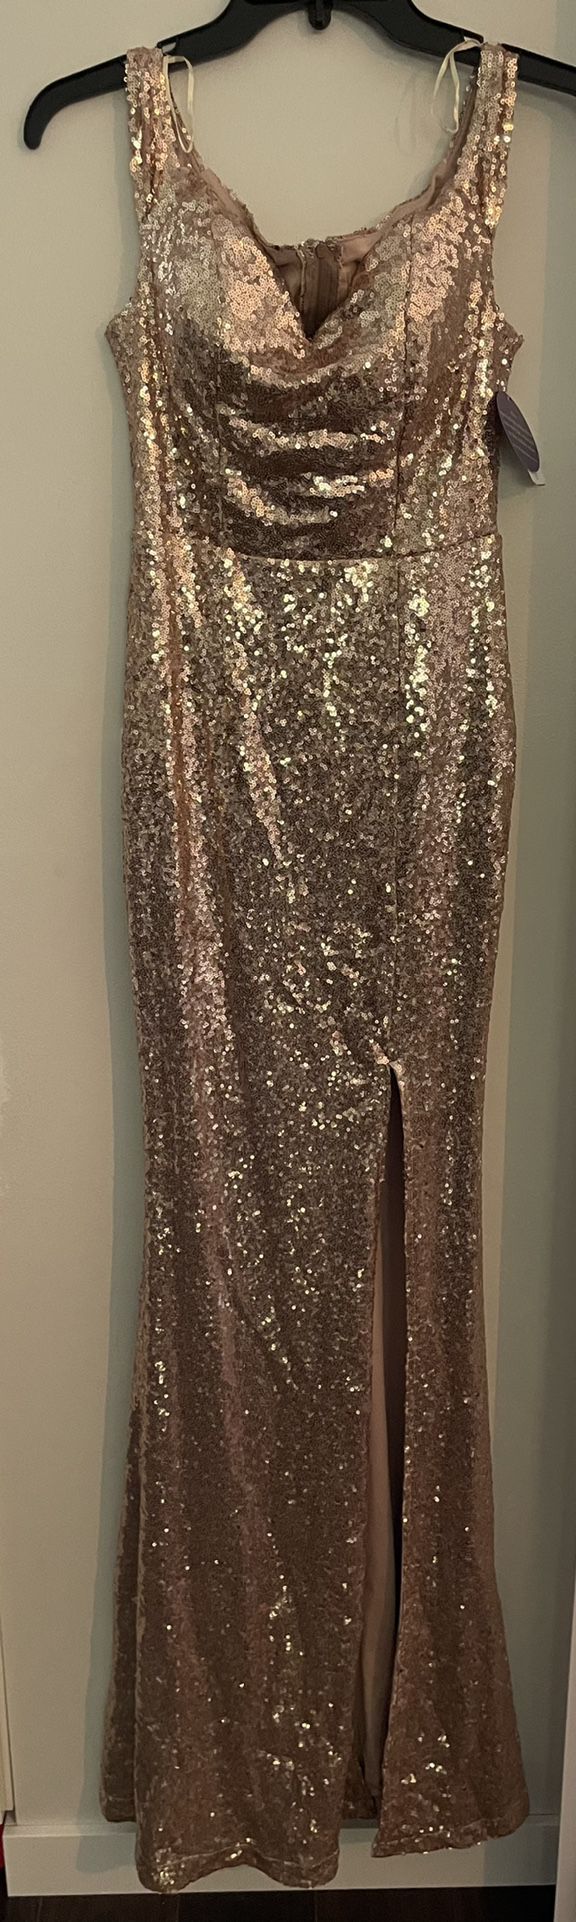 Ariana Formal/Prom Sequin Dress